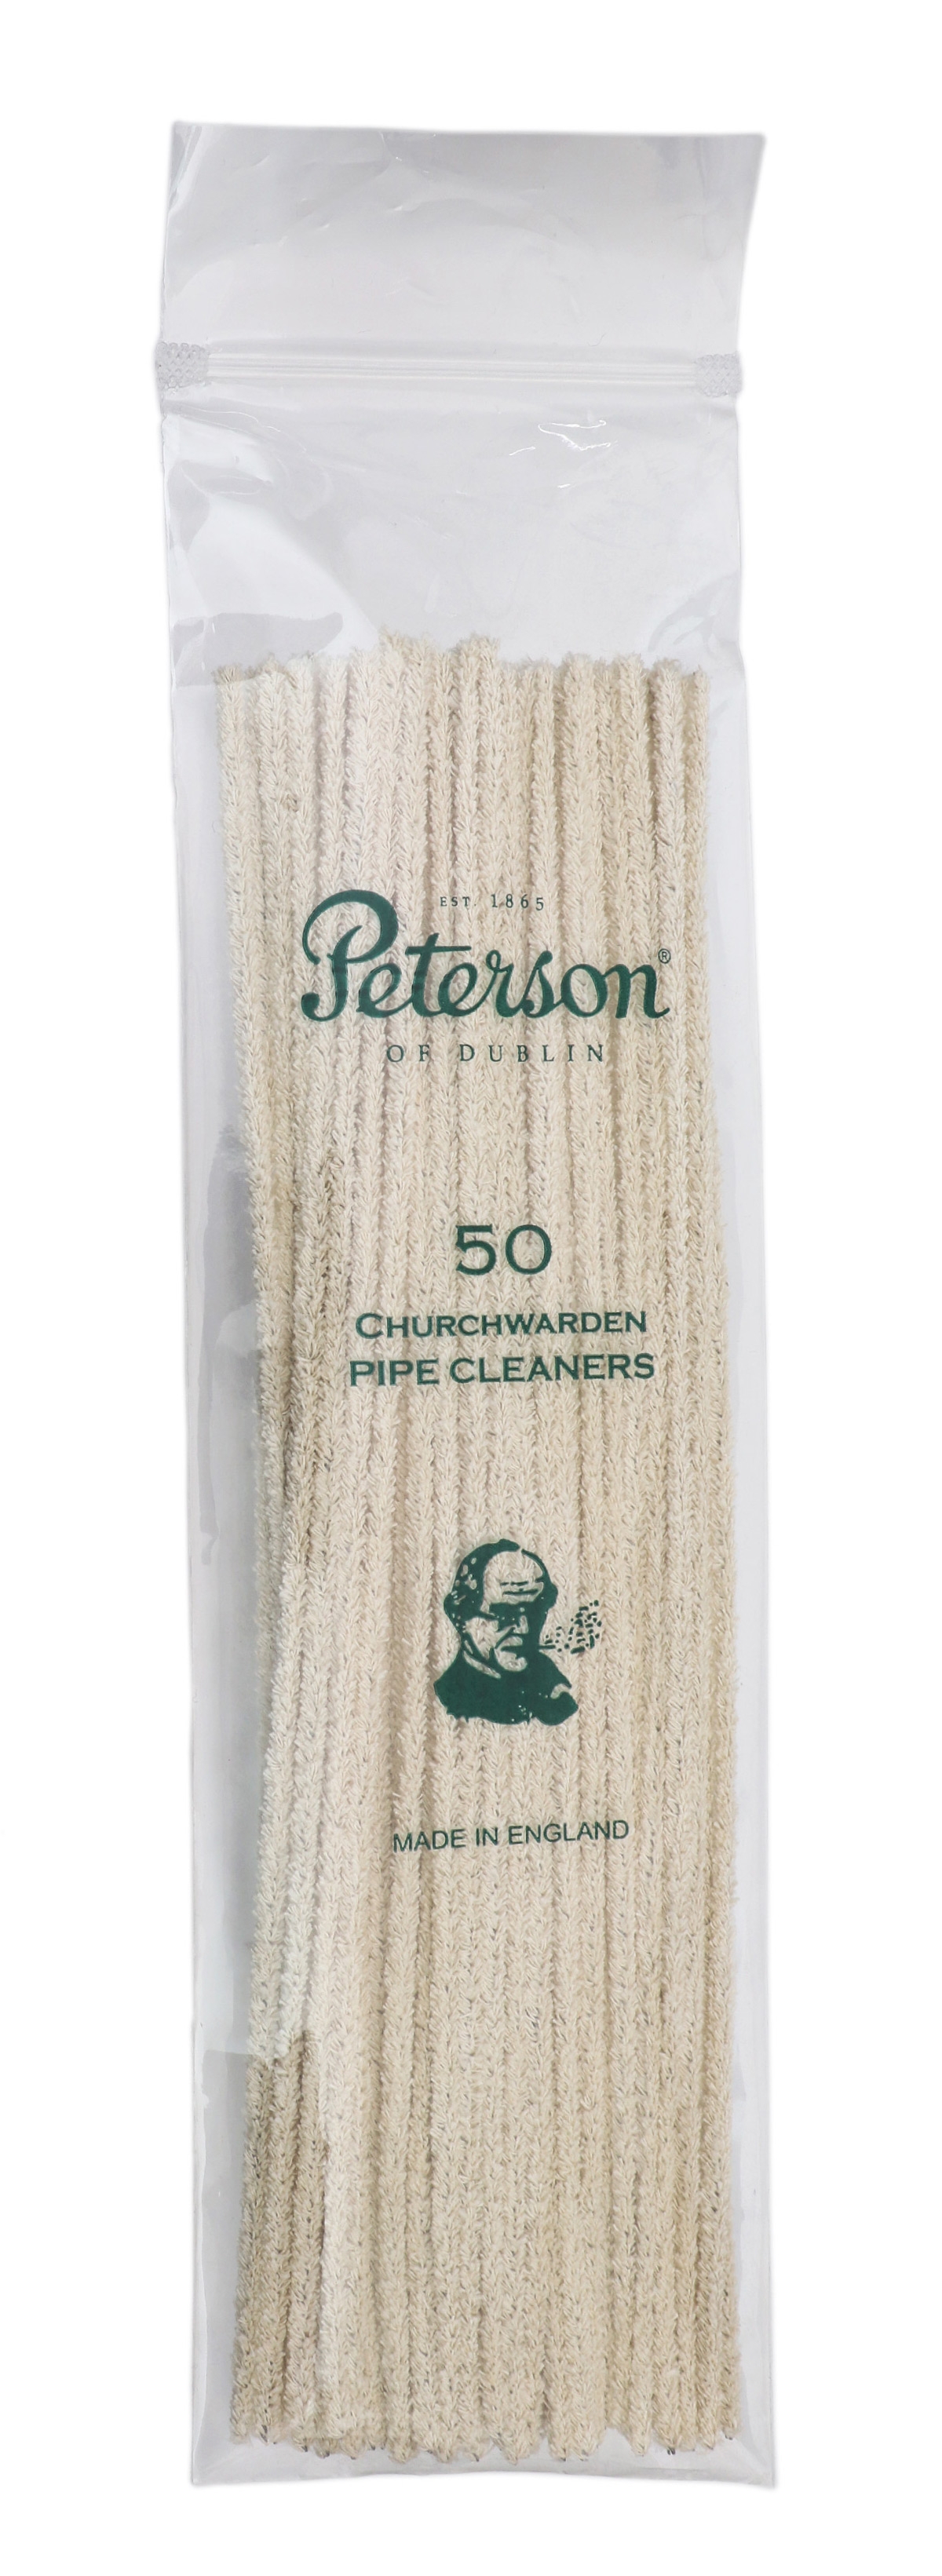 Peterson Churchwarden Pipe Cleaners (50 Pack)